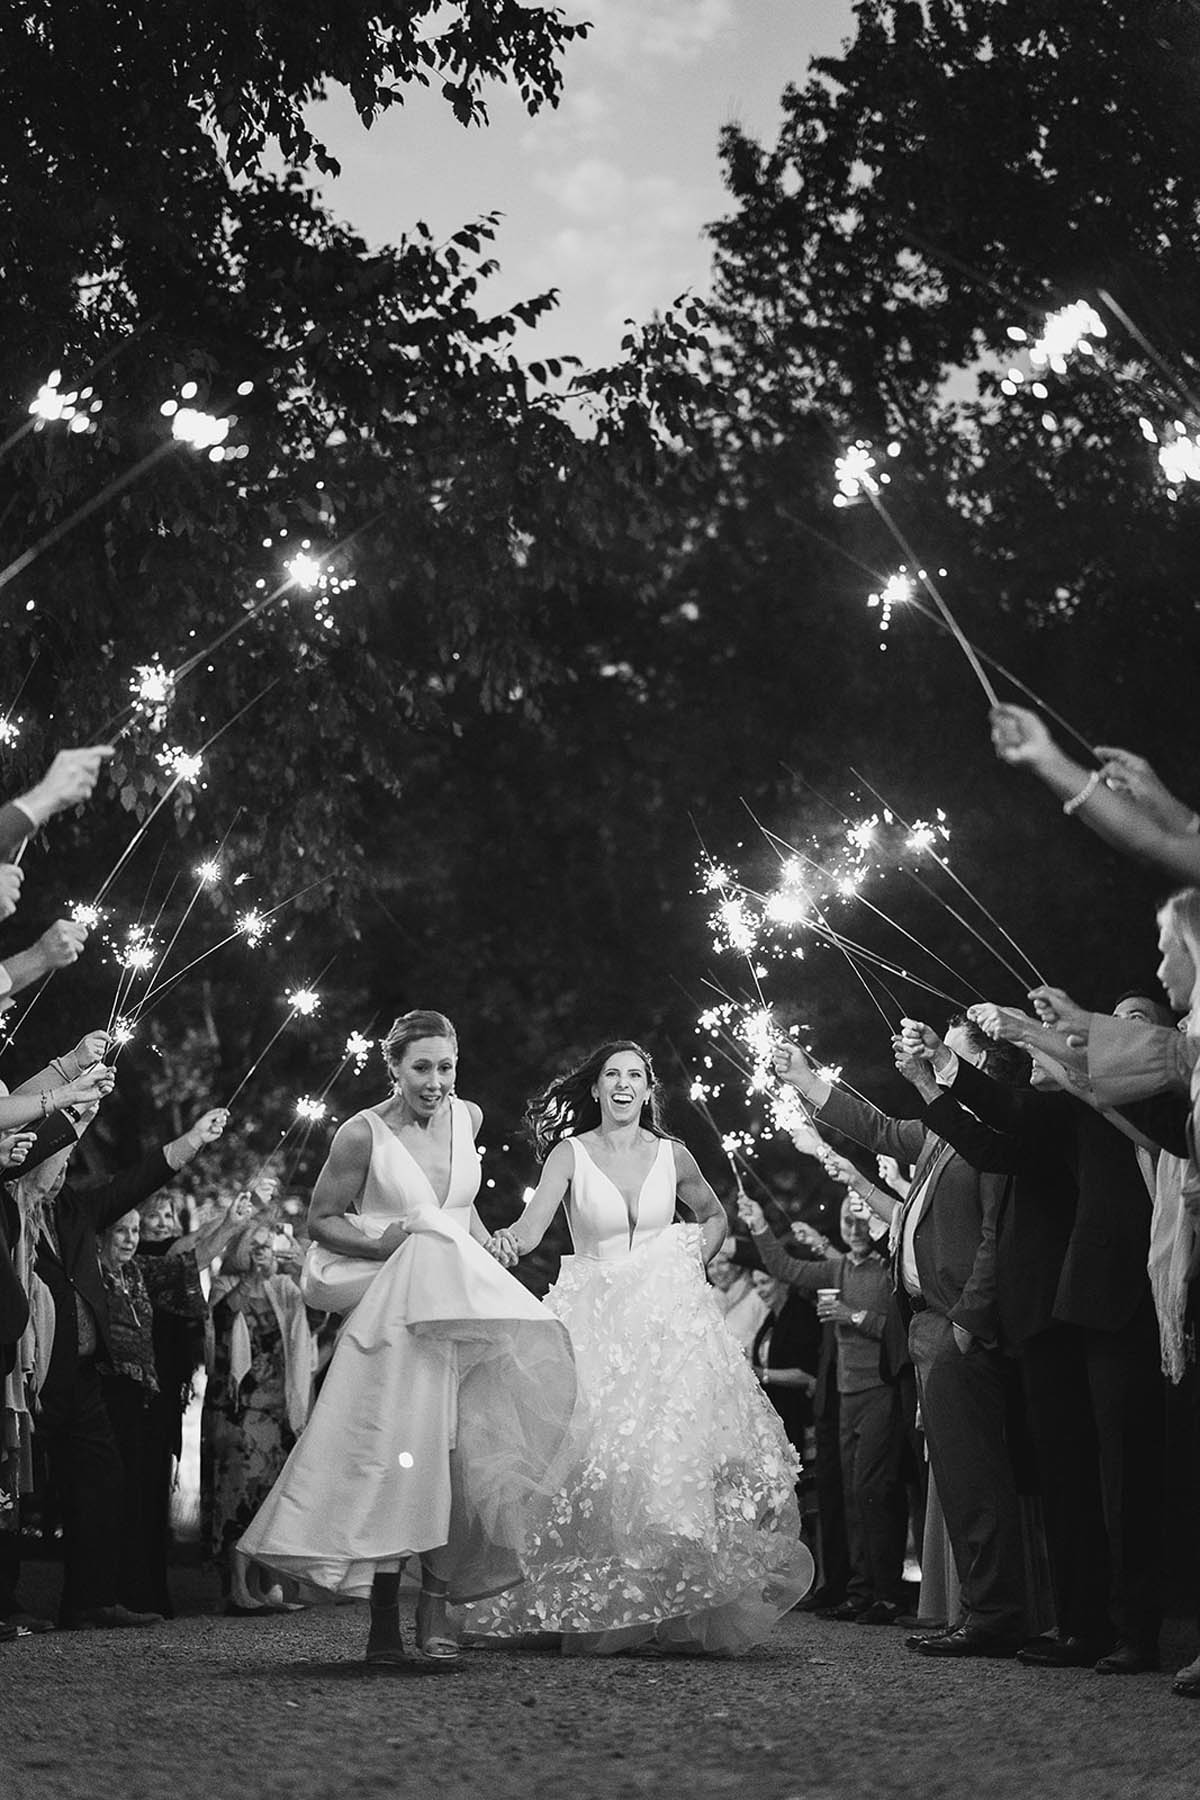 A black-and-white photo of two brides running down an aisle of friends and family holding sparklers.